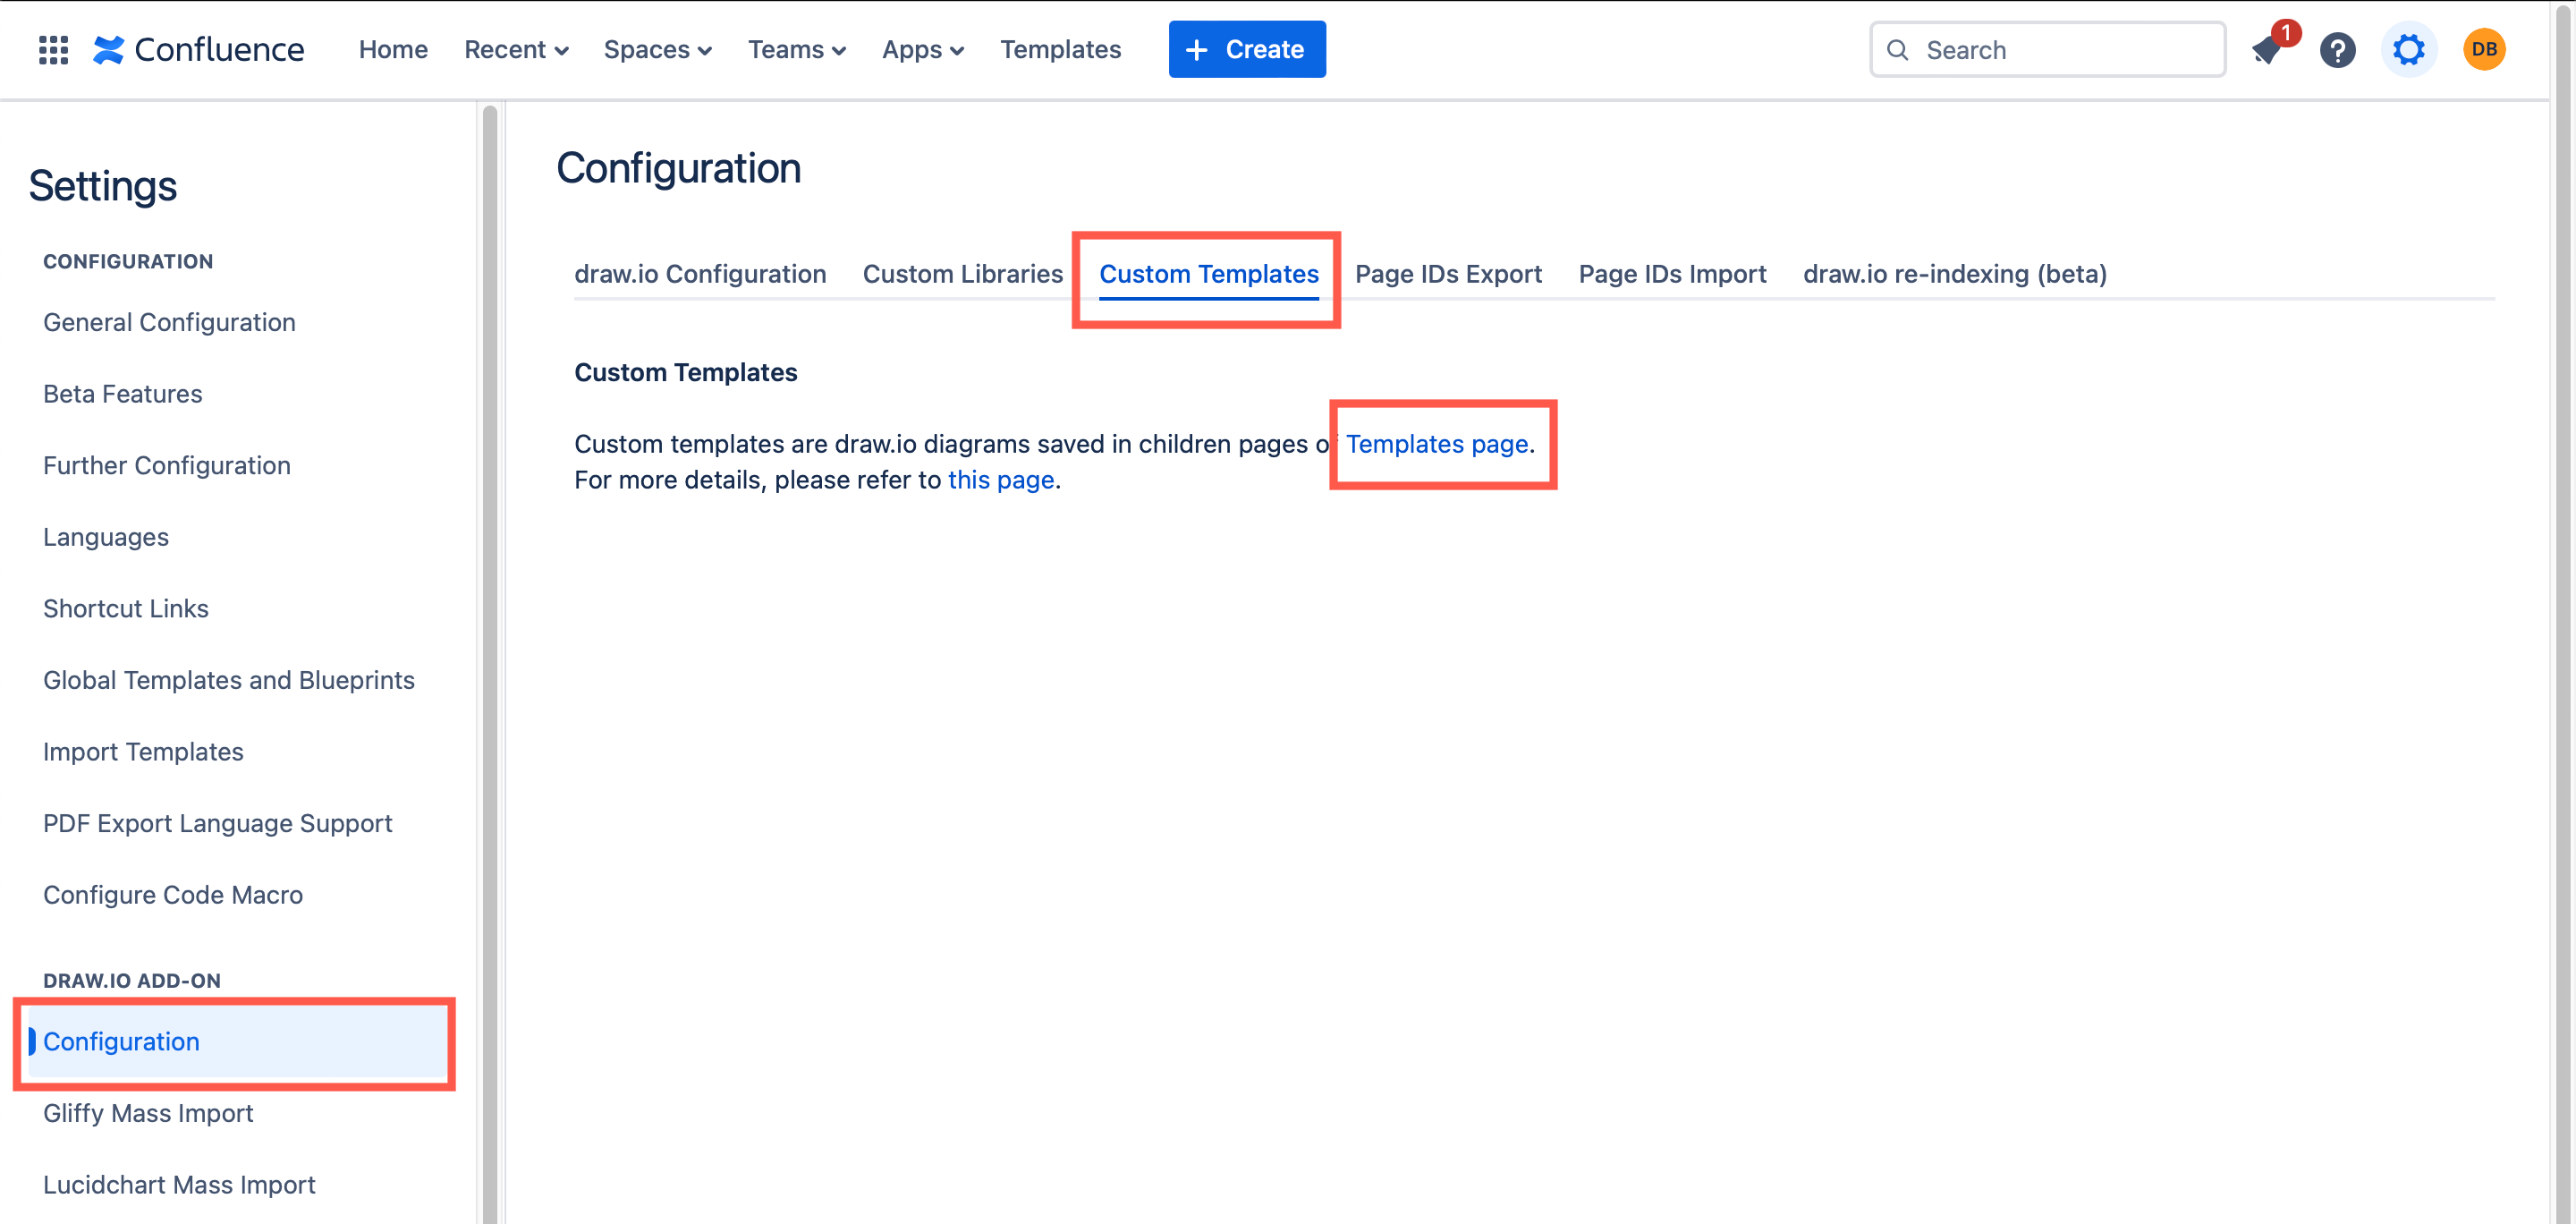 Go to the Templates page via the draw.io Configuration in Confluence Cloud